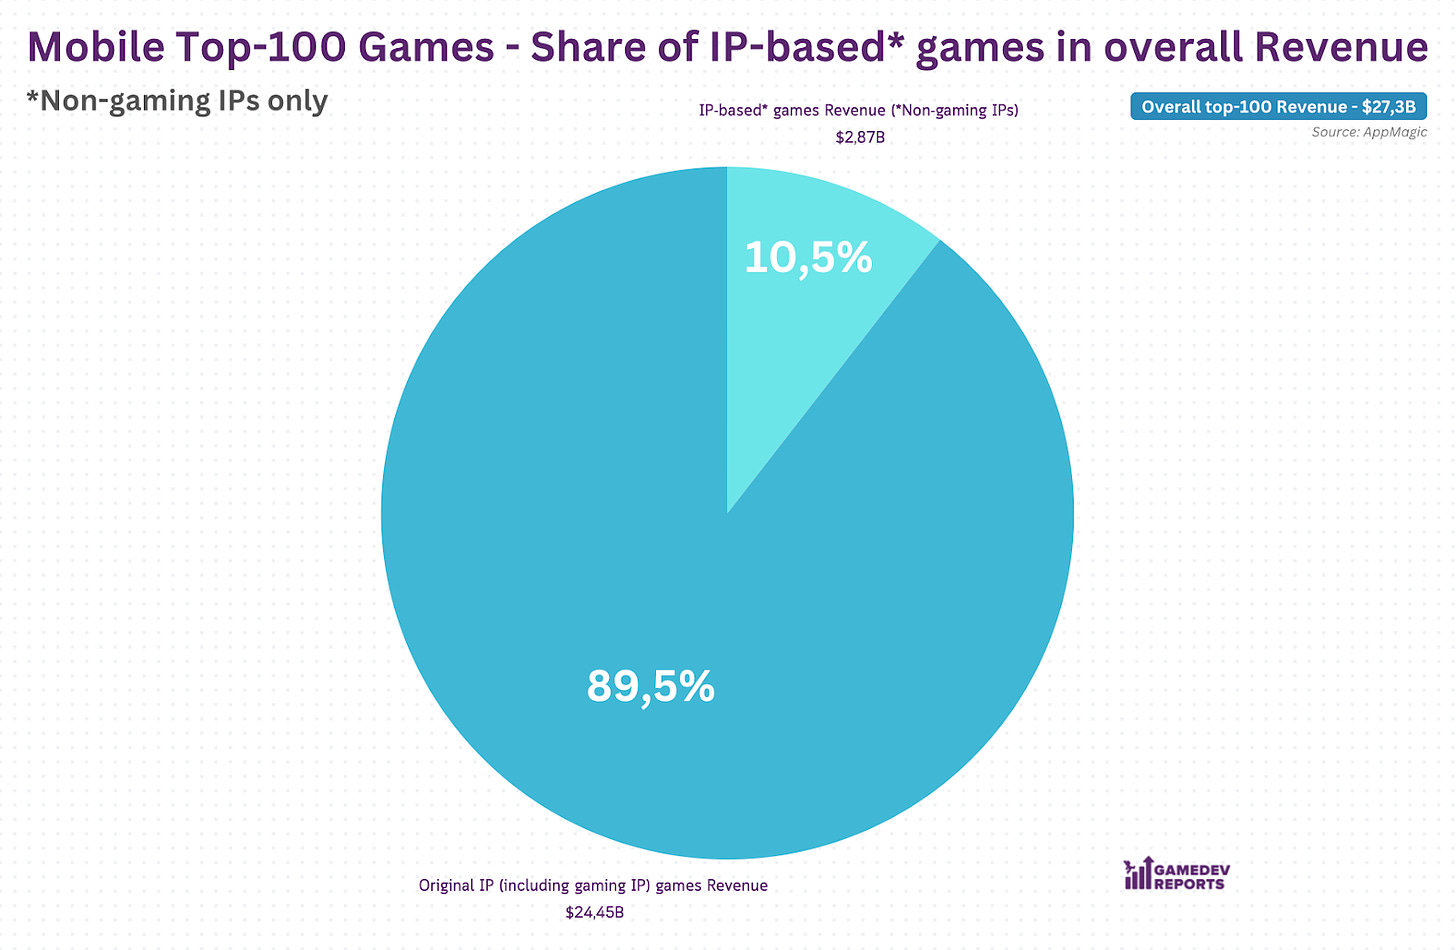 share ip-based games in overall revenue